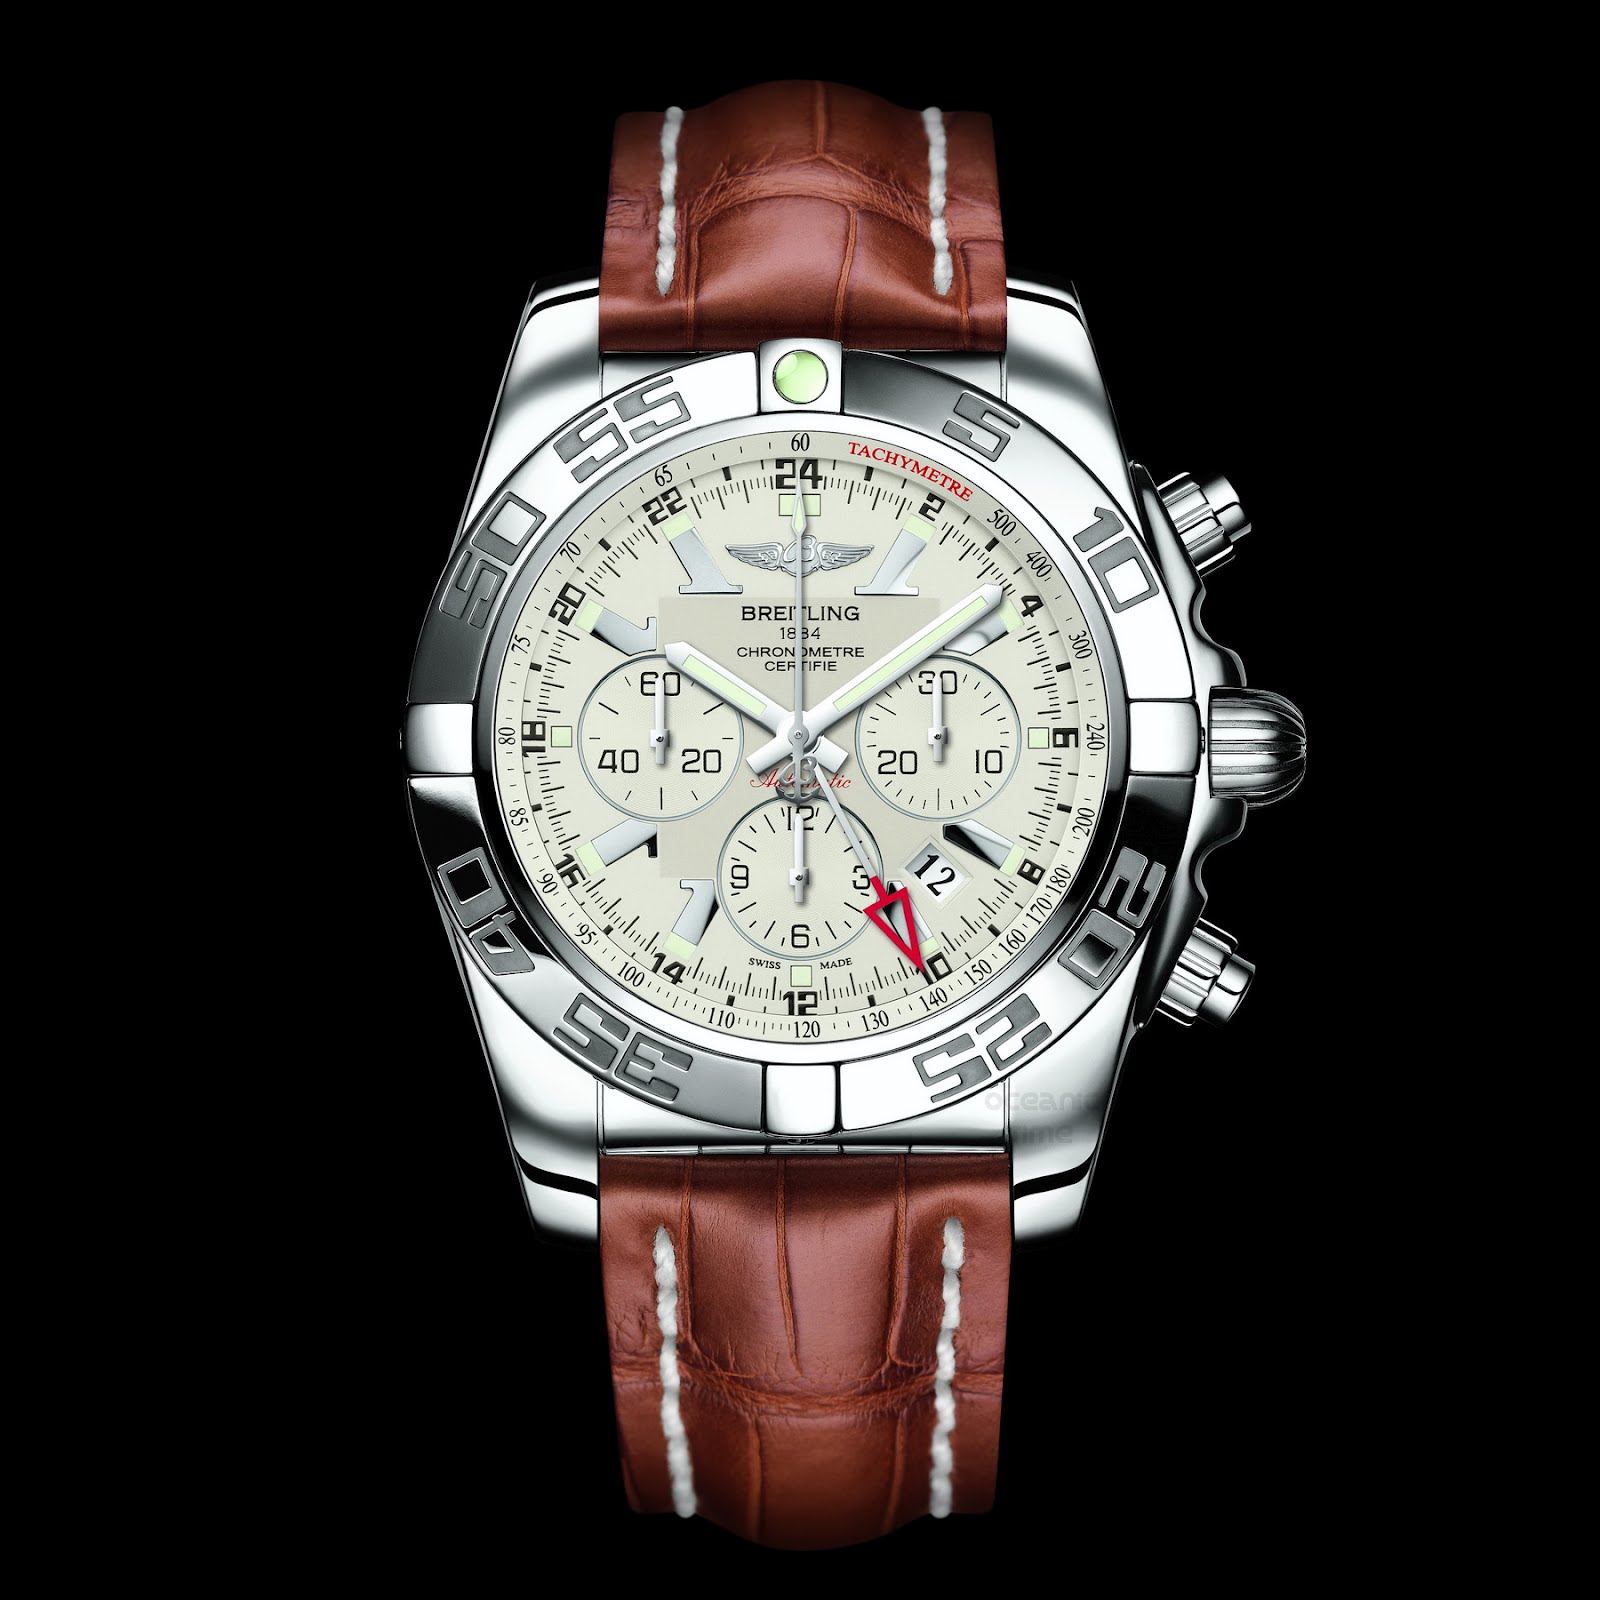 MOVEMENT Automatic, Breitling 04 manufacture calibre, COSC-certified ...